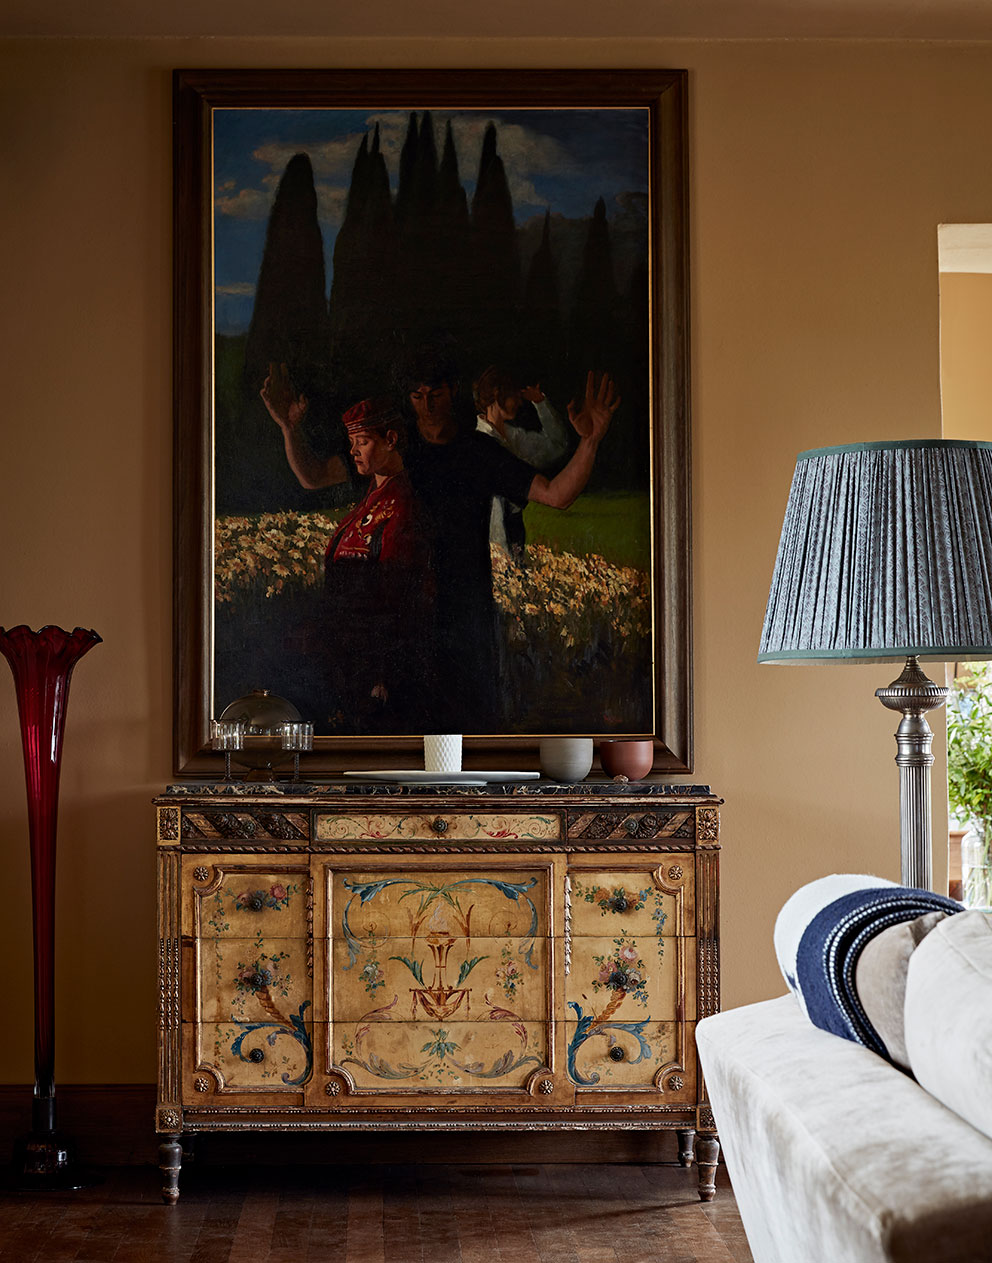 Antique furniture and a unique painting on the lime walls of a rural home with bespoke interior design by Godrich.